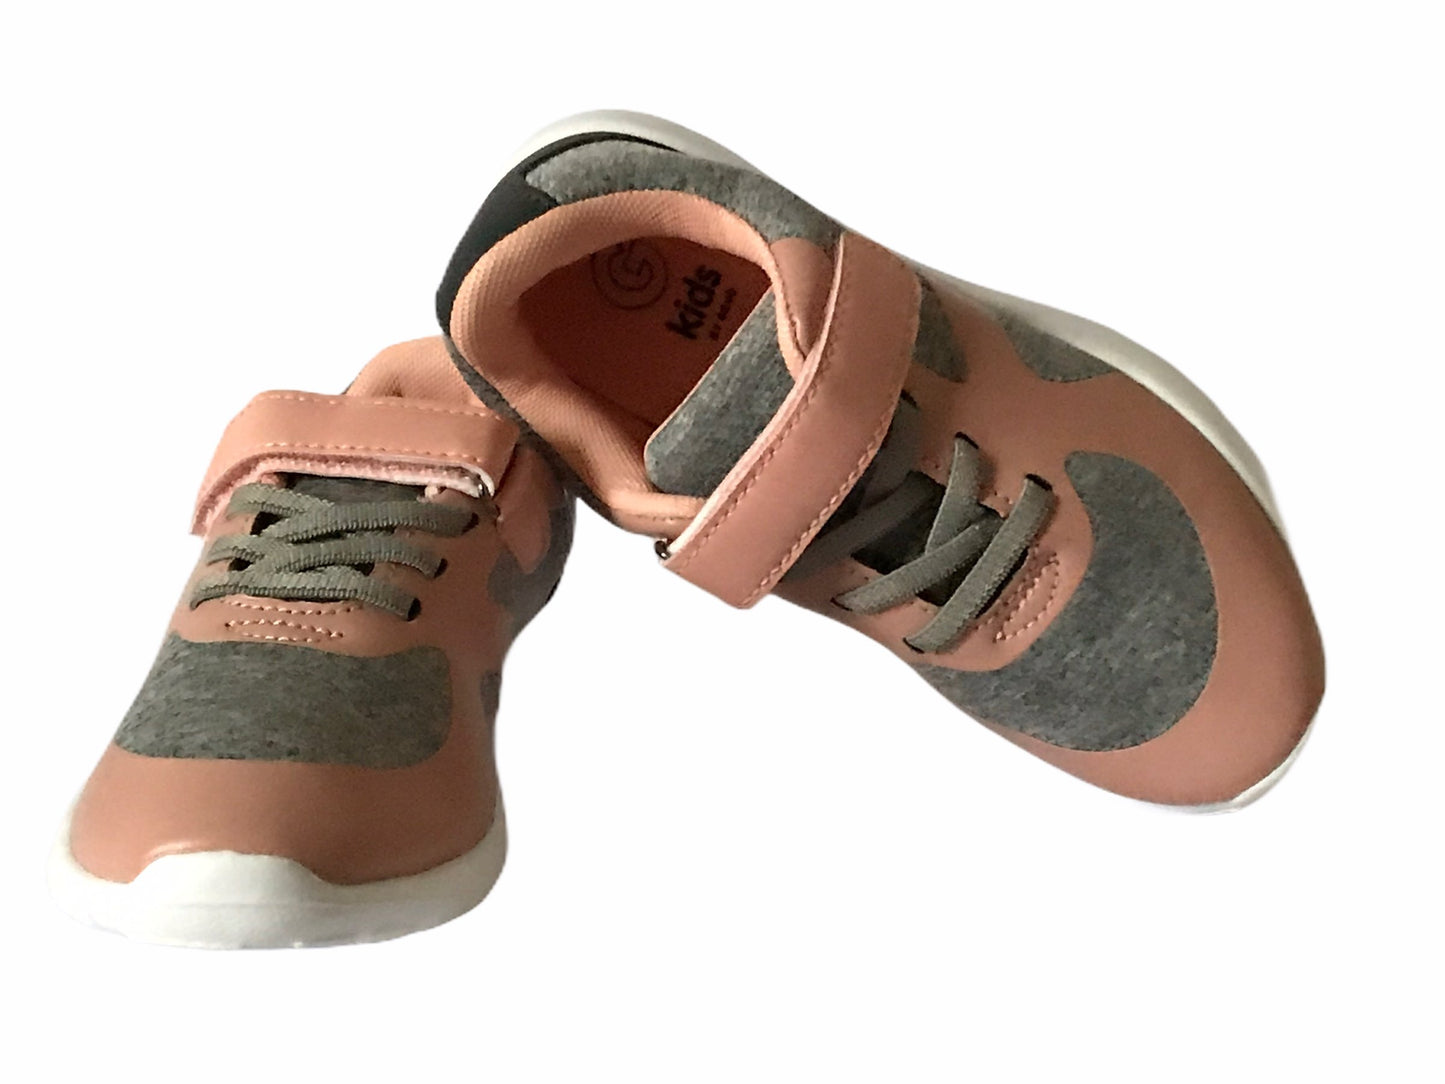 KIDS Peach & Grey Trainers - Glo Selections Kids Shoes